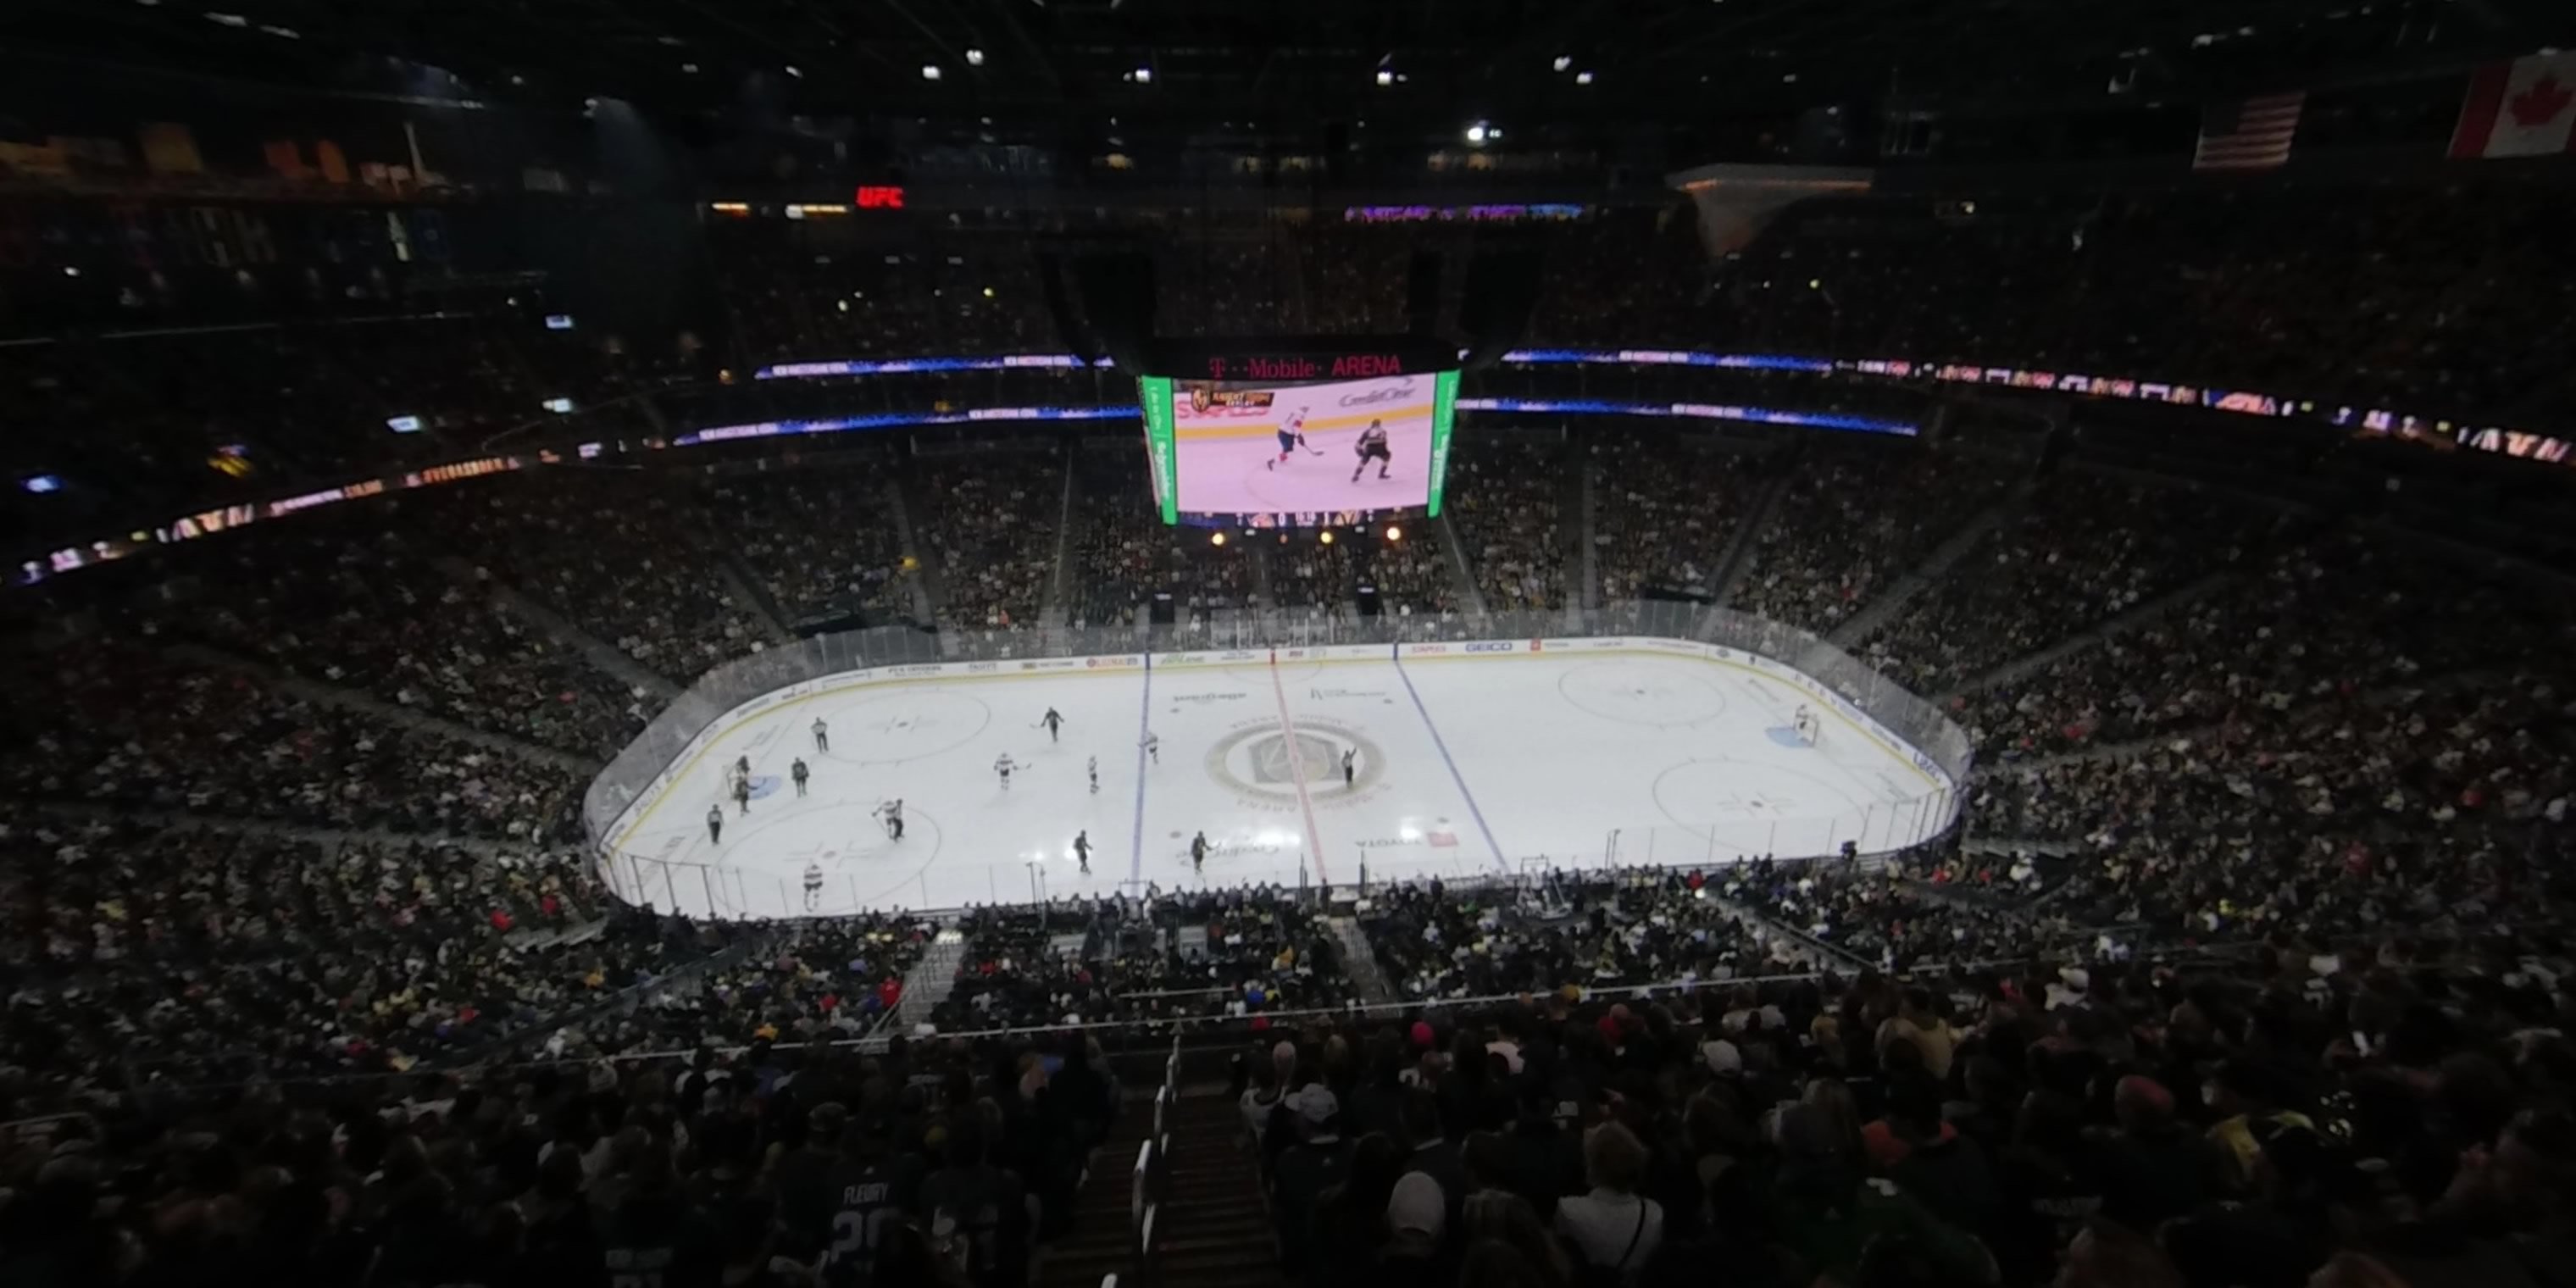 section 204 panoramic seat view  for hockey - t-mobile arena